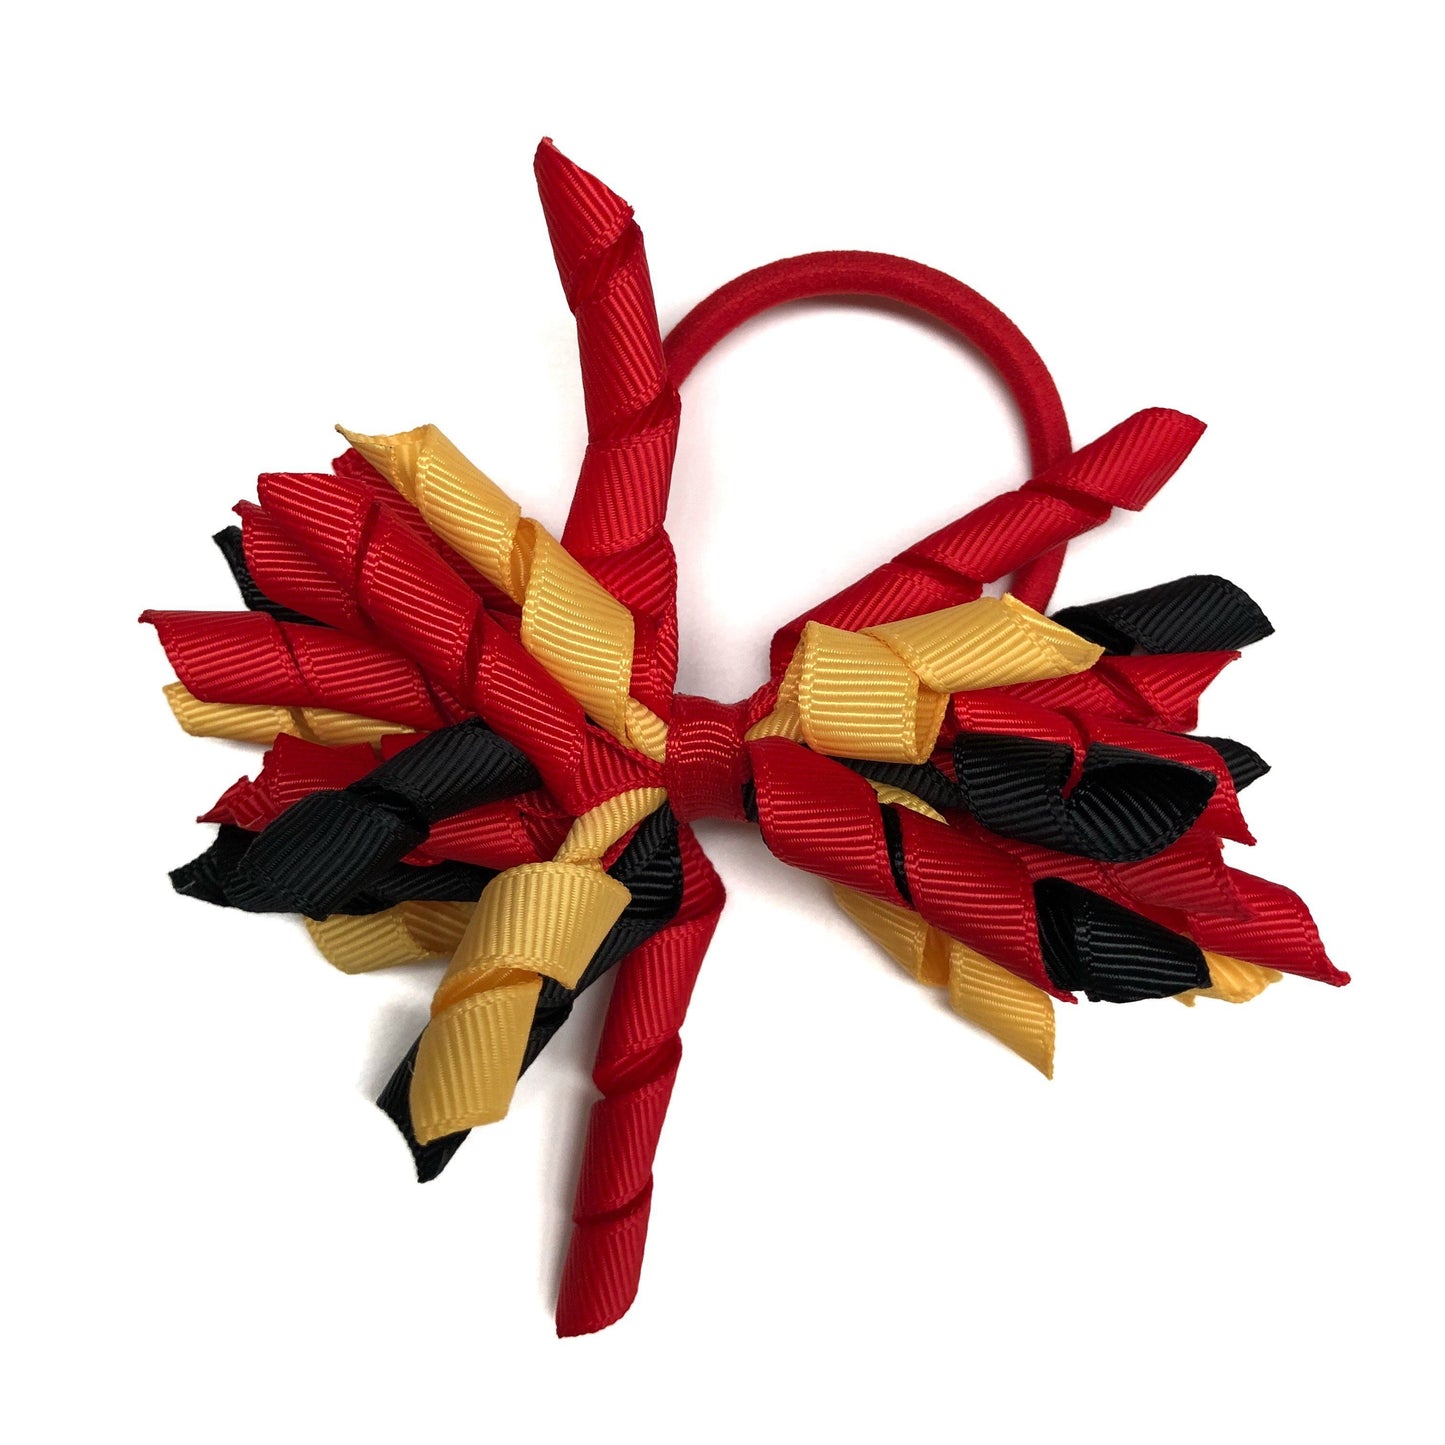 Aboriginal Colours - Red Yellow & Black Hair Accessories - Assorted Hair Accessories - School Uniform Hair Accessories - Ponytails and Fairytales